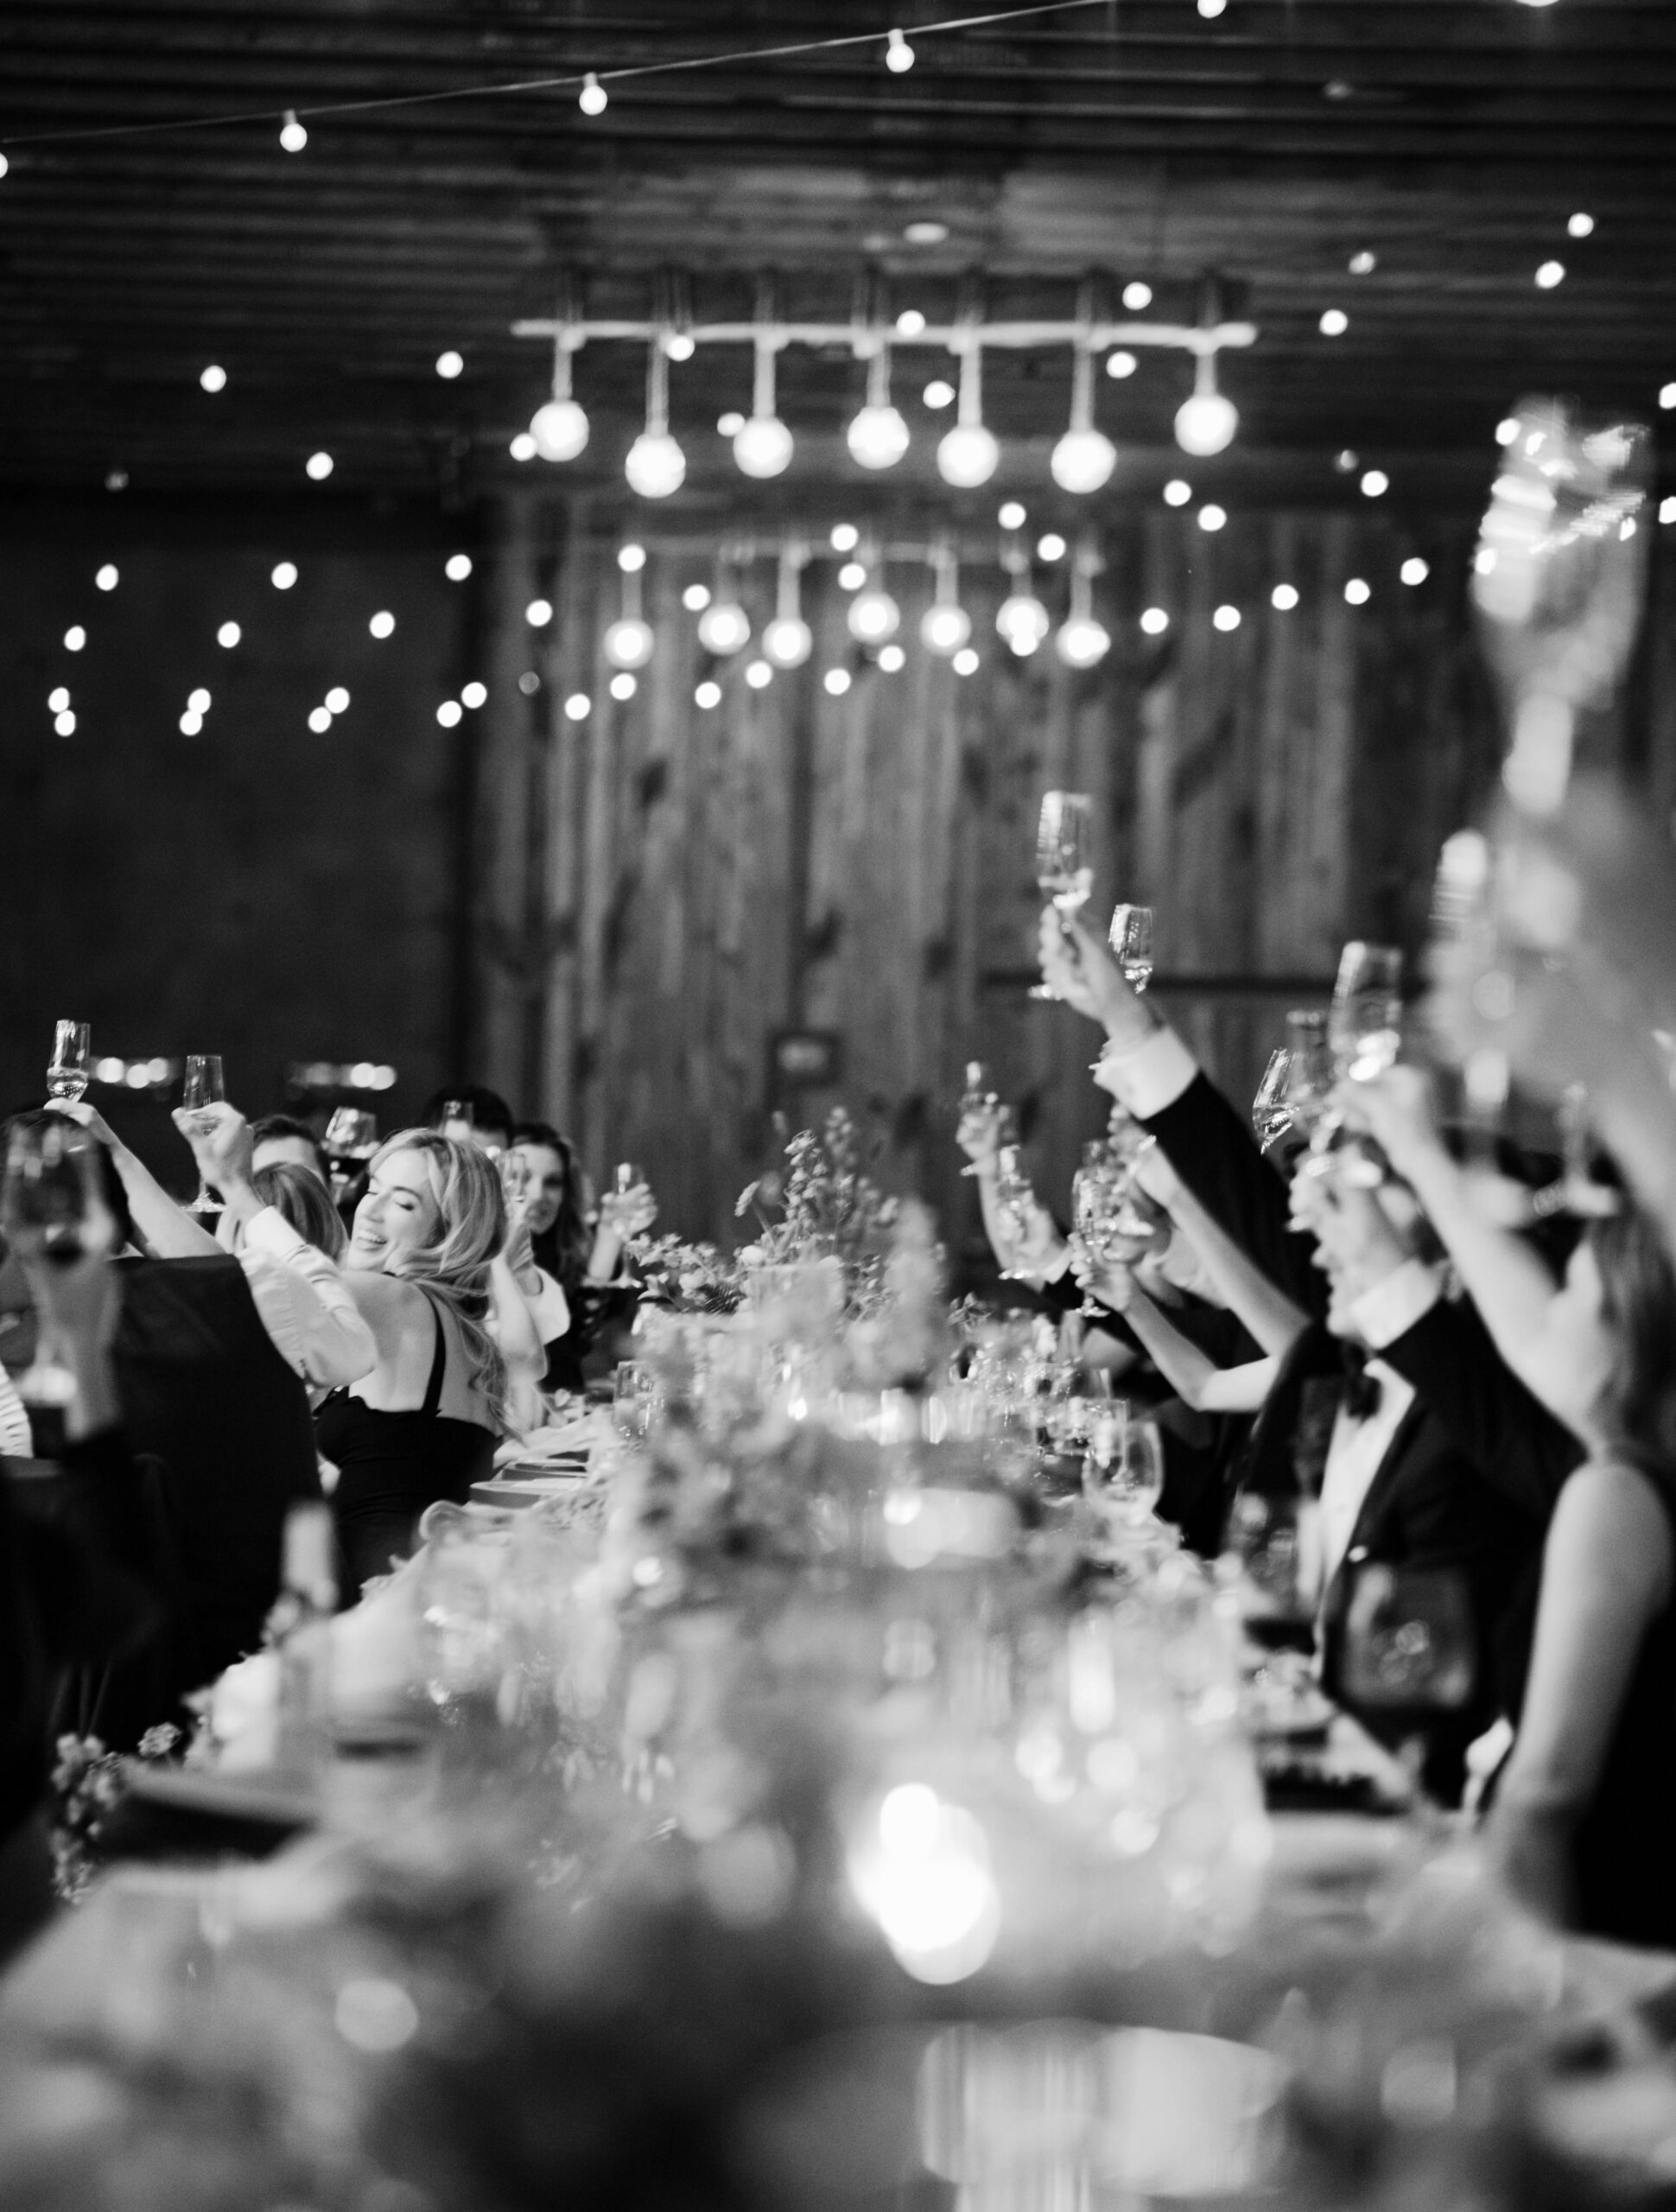 wedding guests at an indoor reception at The Lodge at Blue Sky in Park City, Utah raise their glasses for a toast to the bride and groom